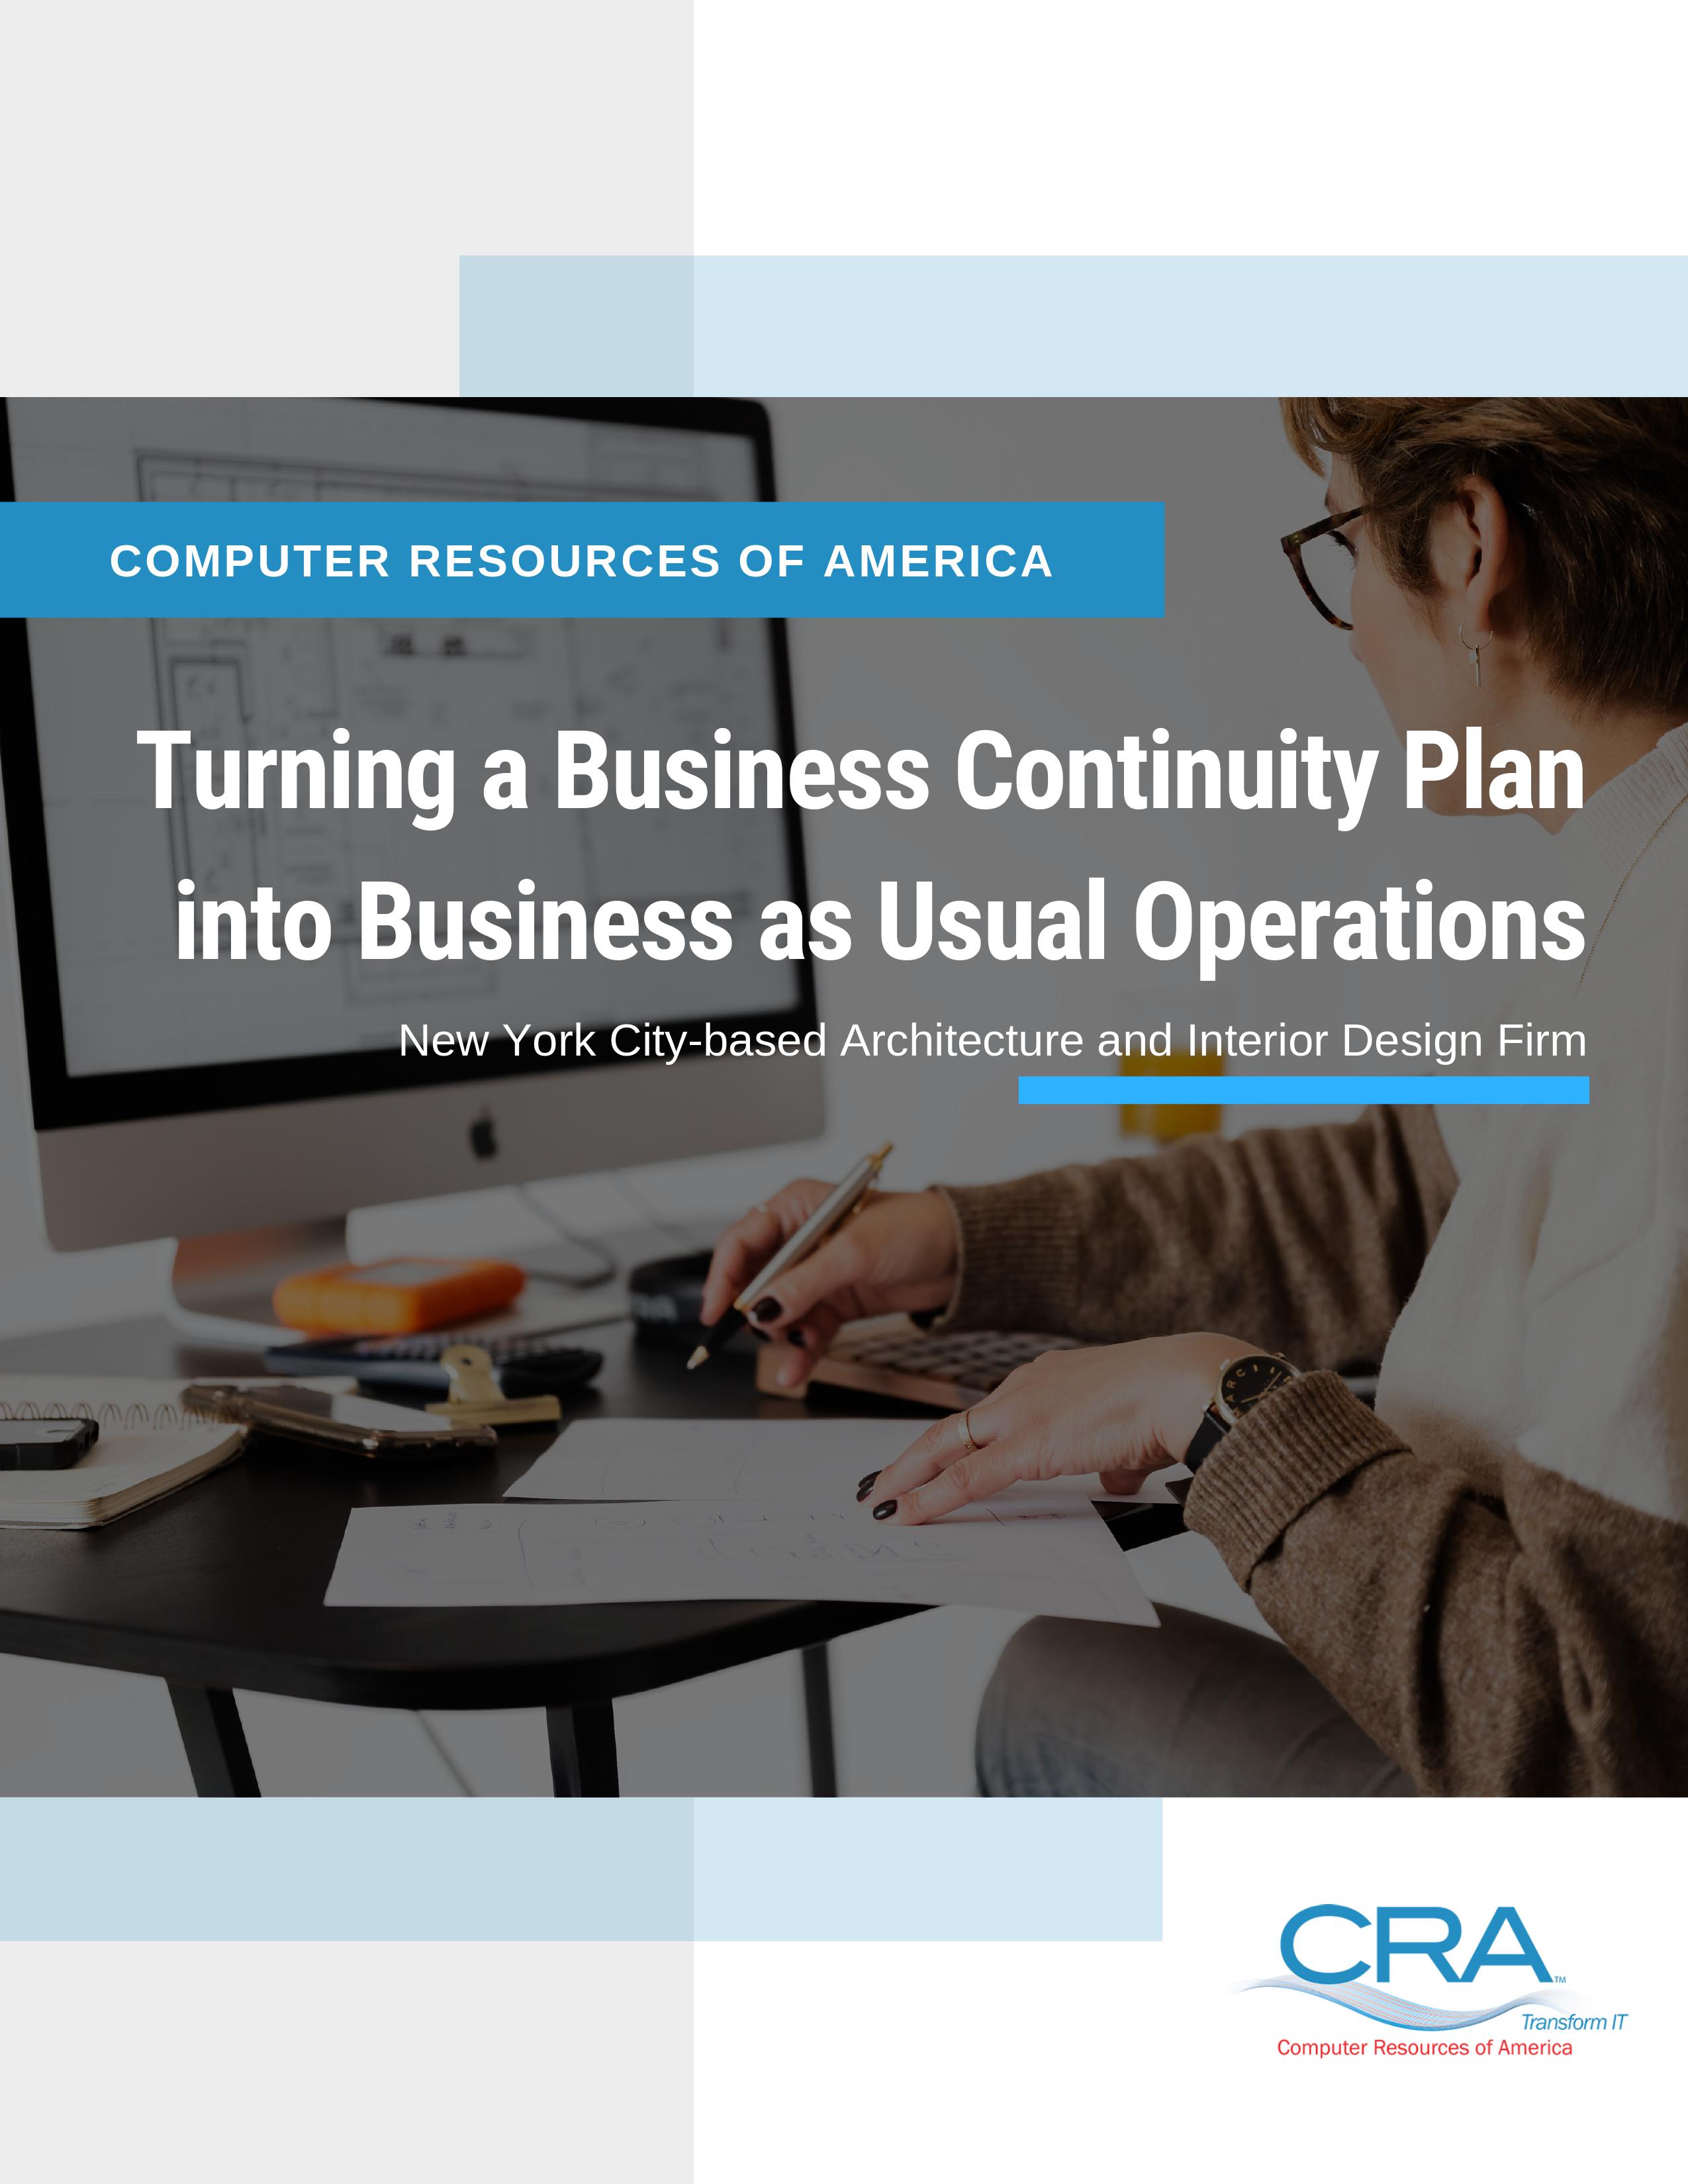 Turning a Business Continuity Plan into Business as Usual Operations